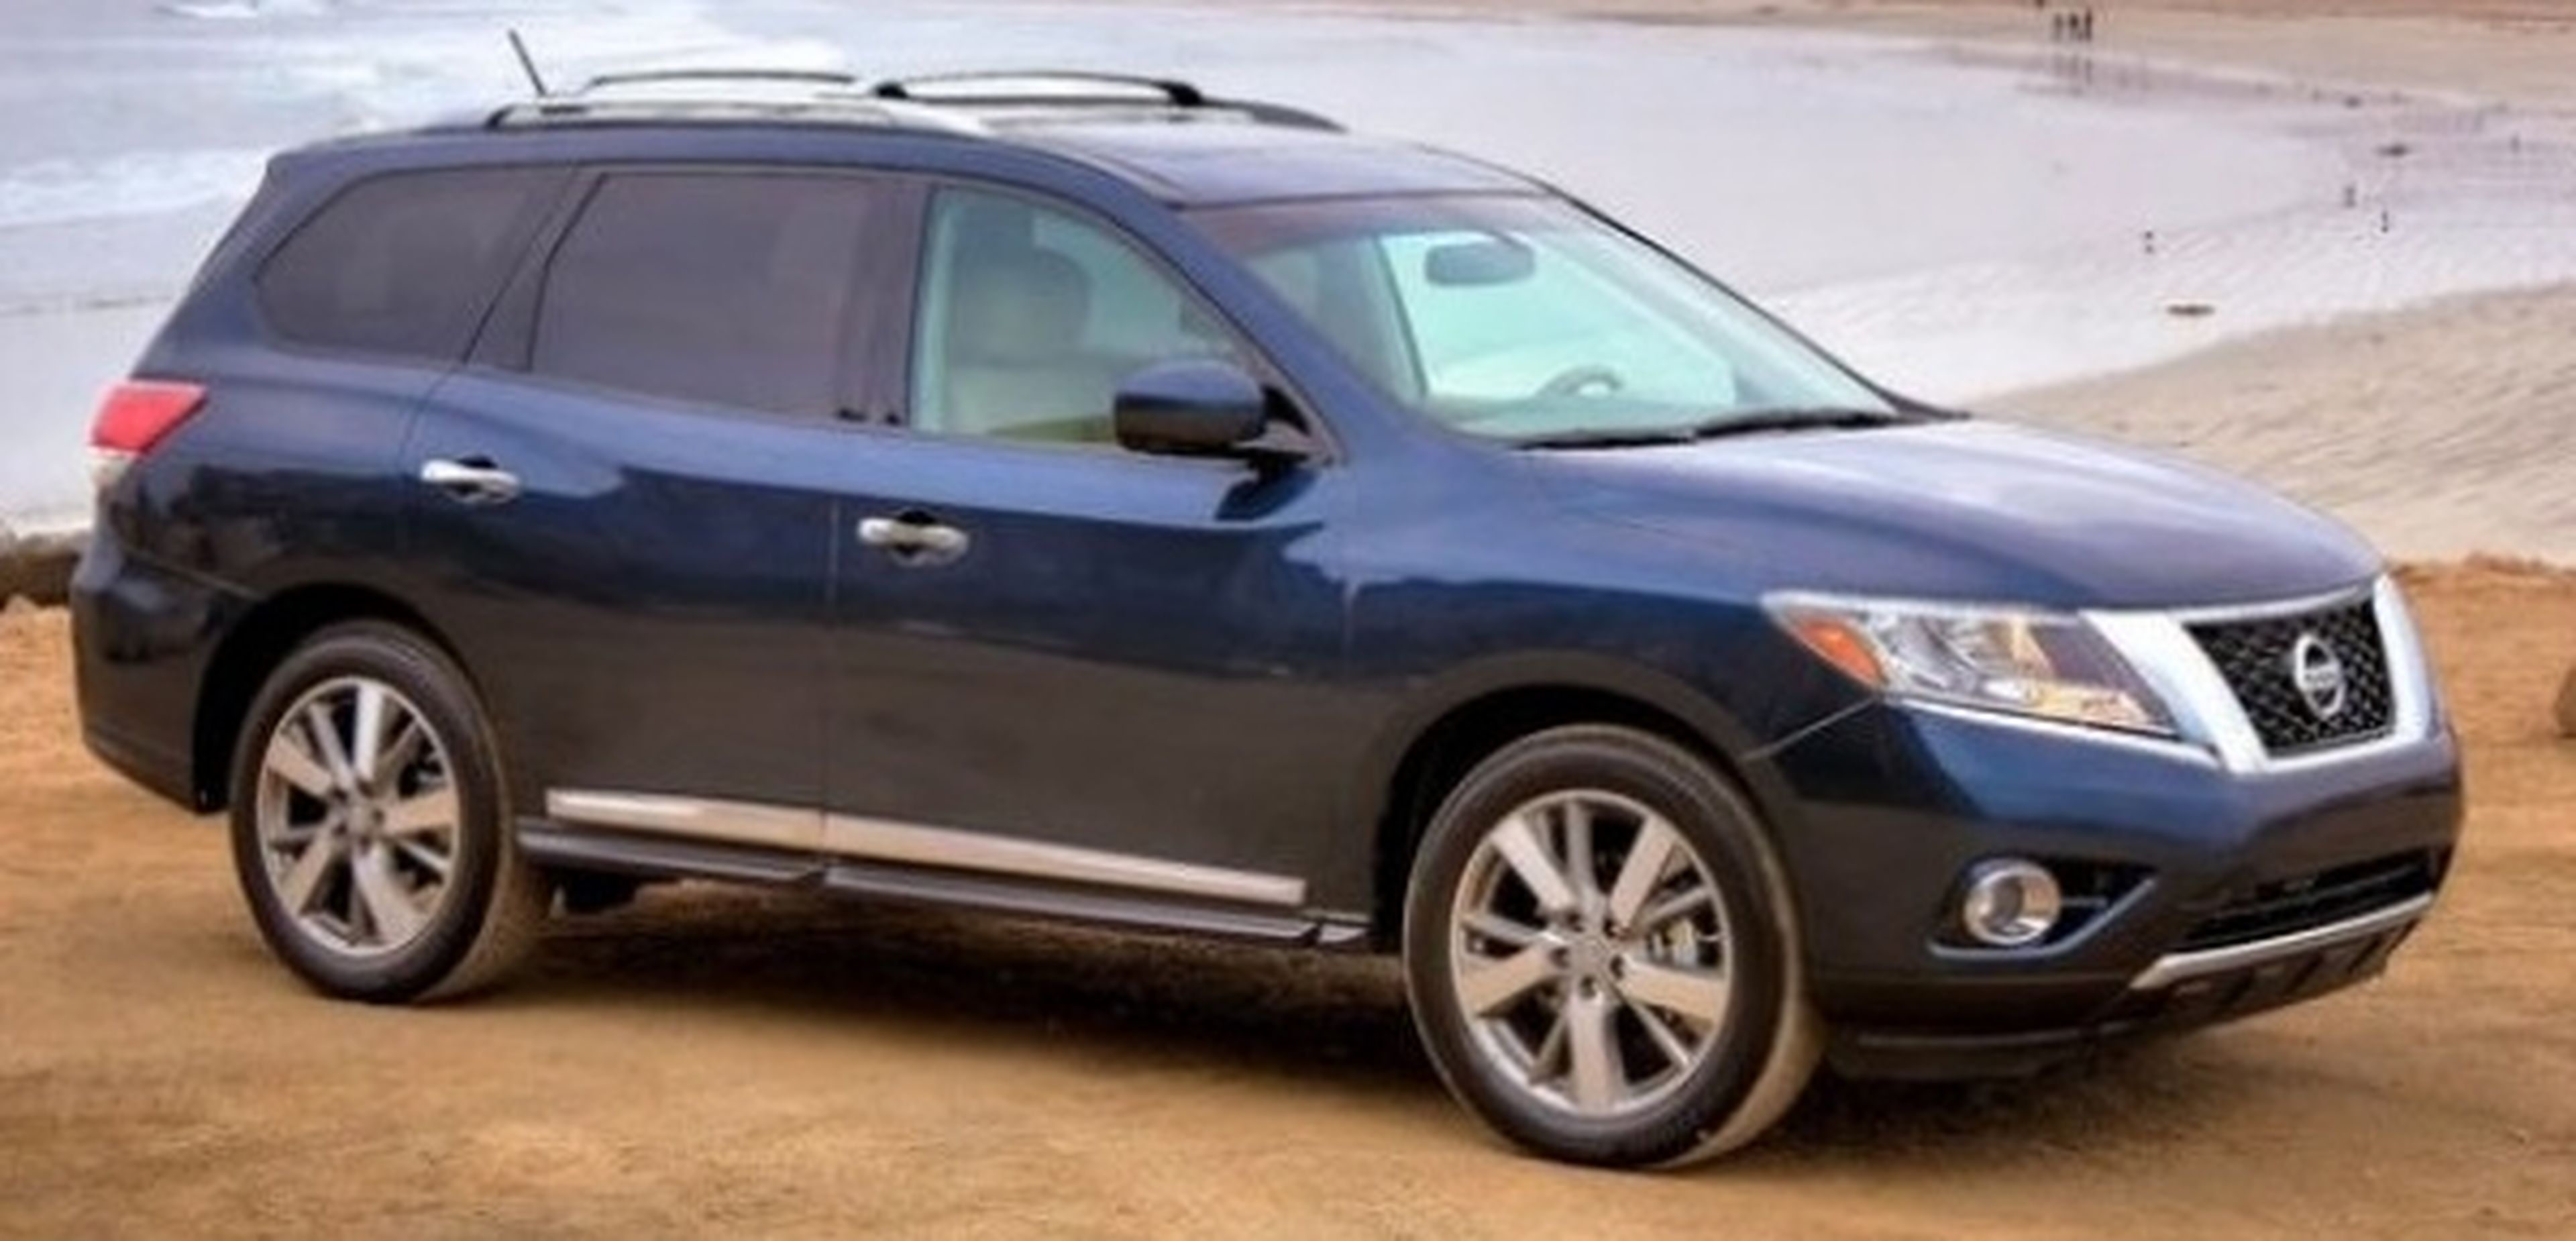 Nissan Pathfinder lateral